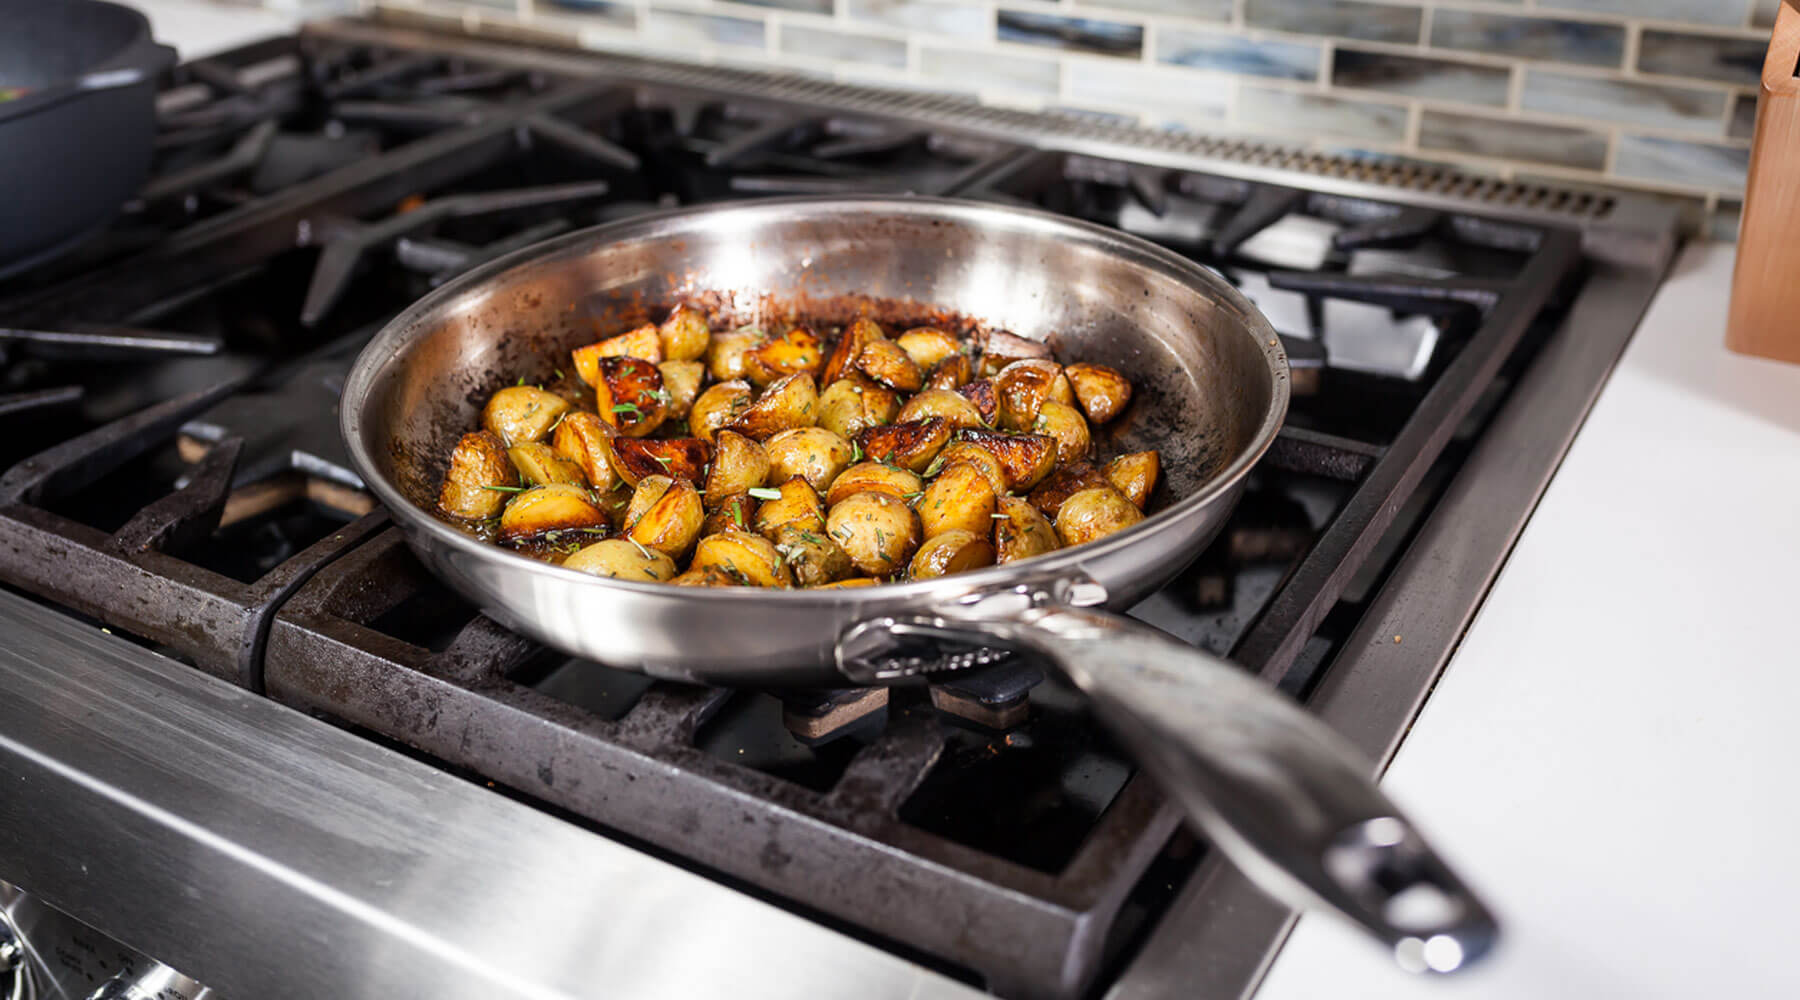 stainless steel fry pan cooking food on stove